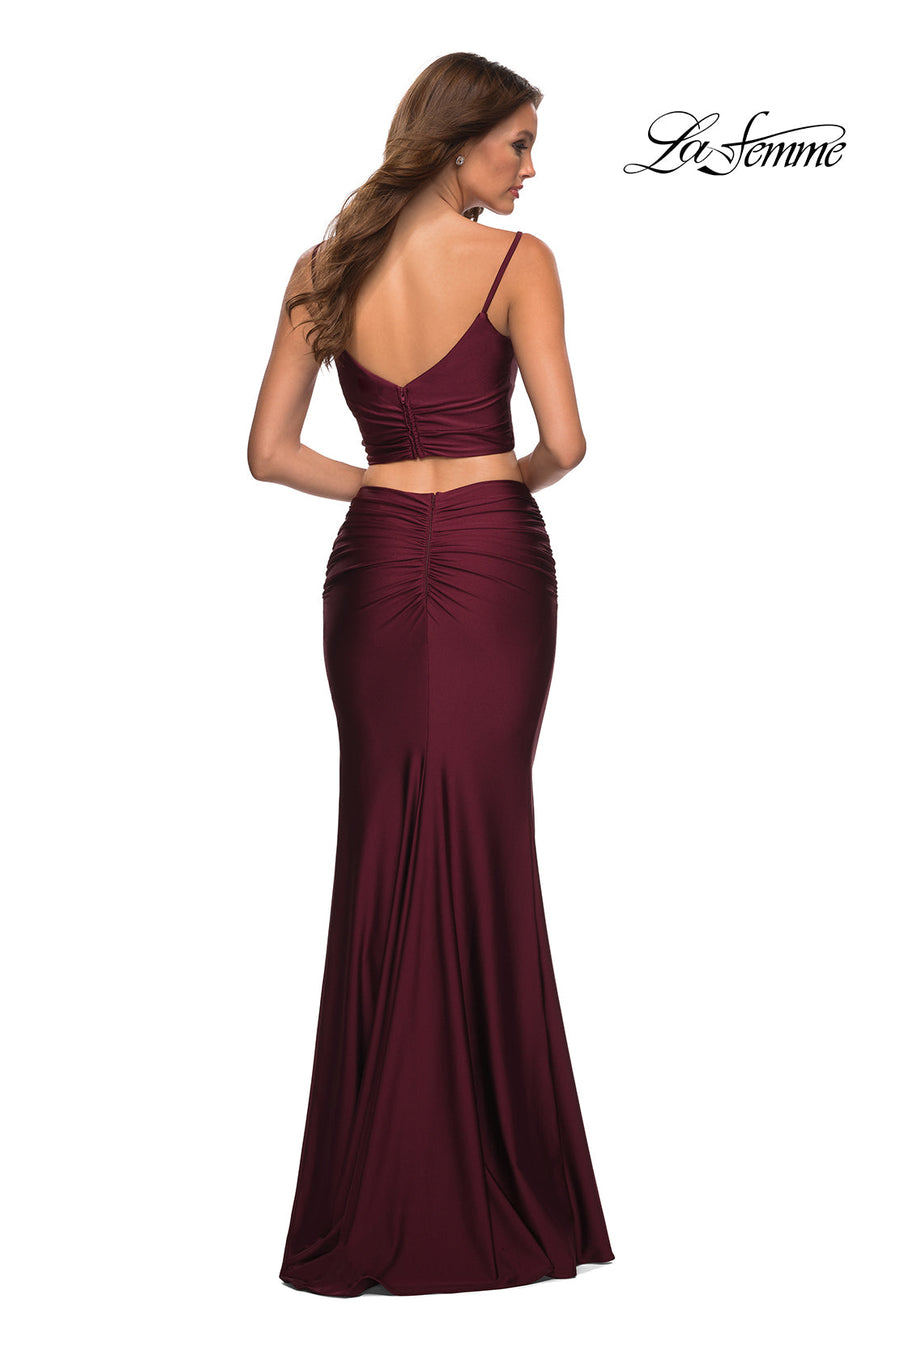 La Femme 29904 prom dress images.  La Femme 29904 is available in these colors: Dark Berry.